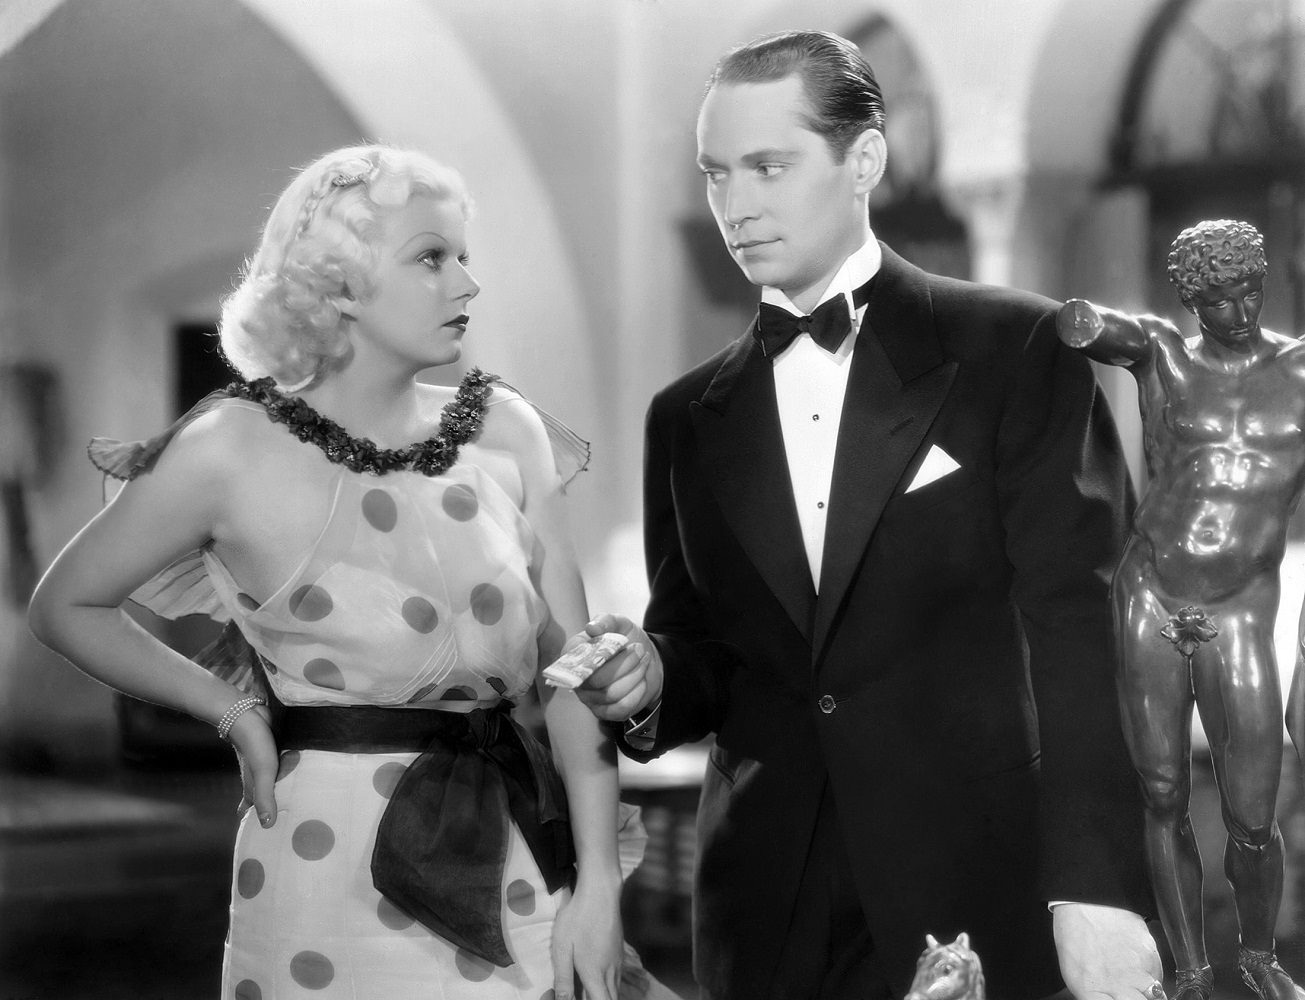 Jean Harlow and Franchot Tone in The girl from Missouri 1934